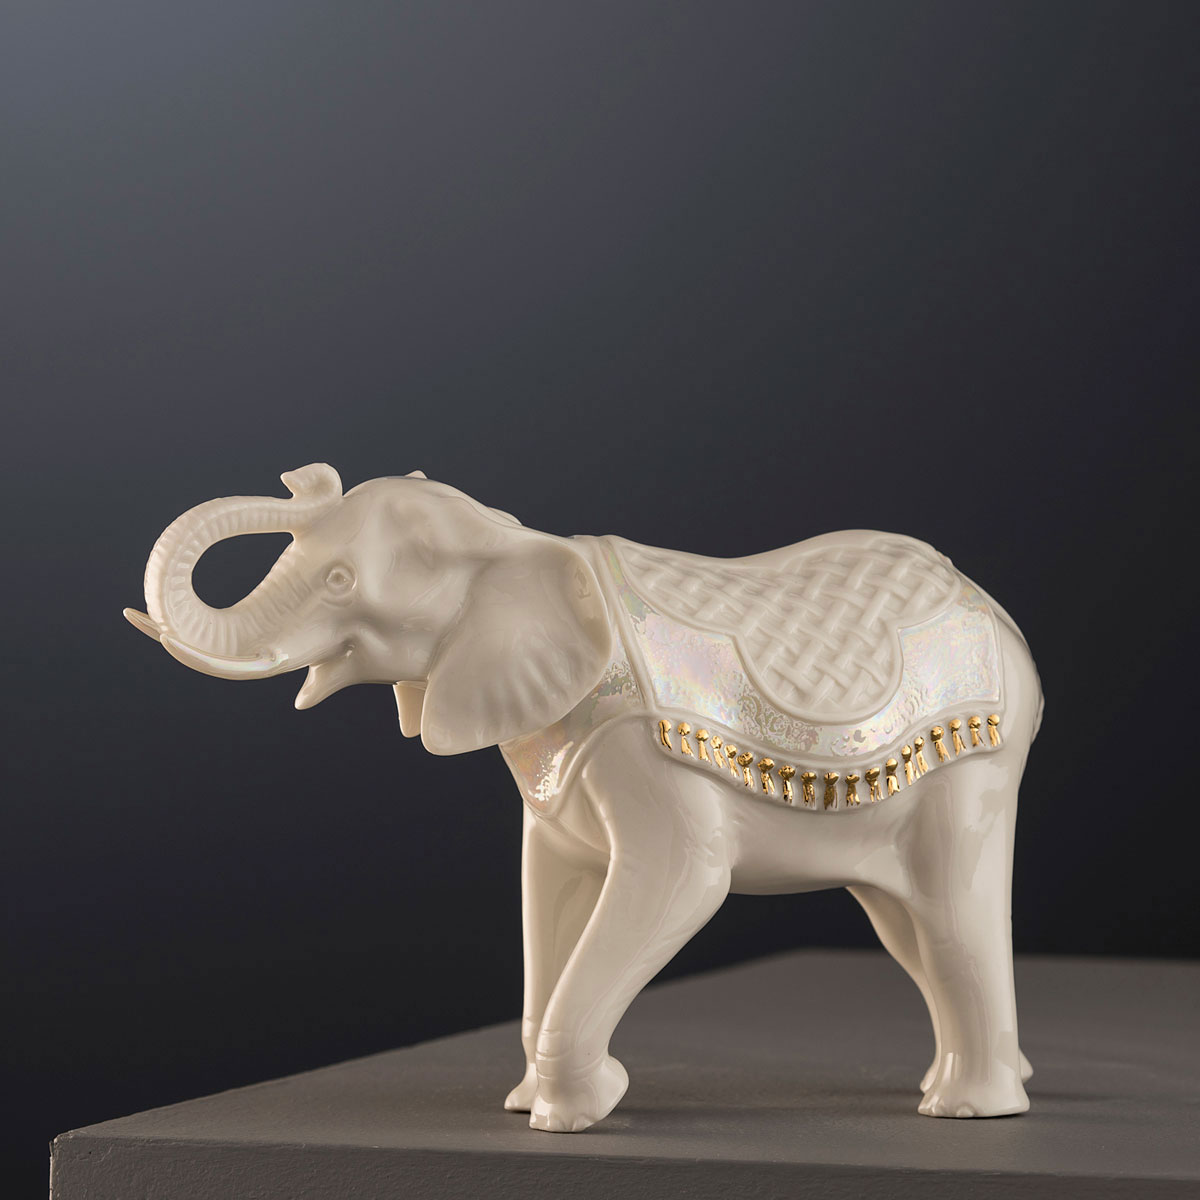 Belleek Masterpiece Collection Elephant, Limited Edition